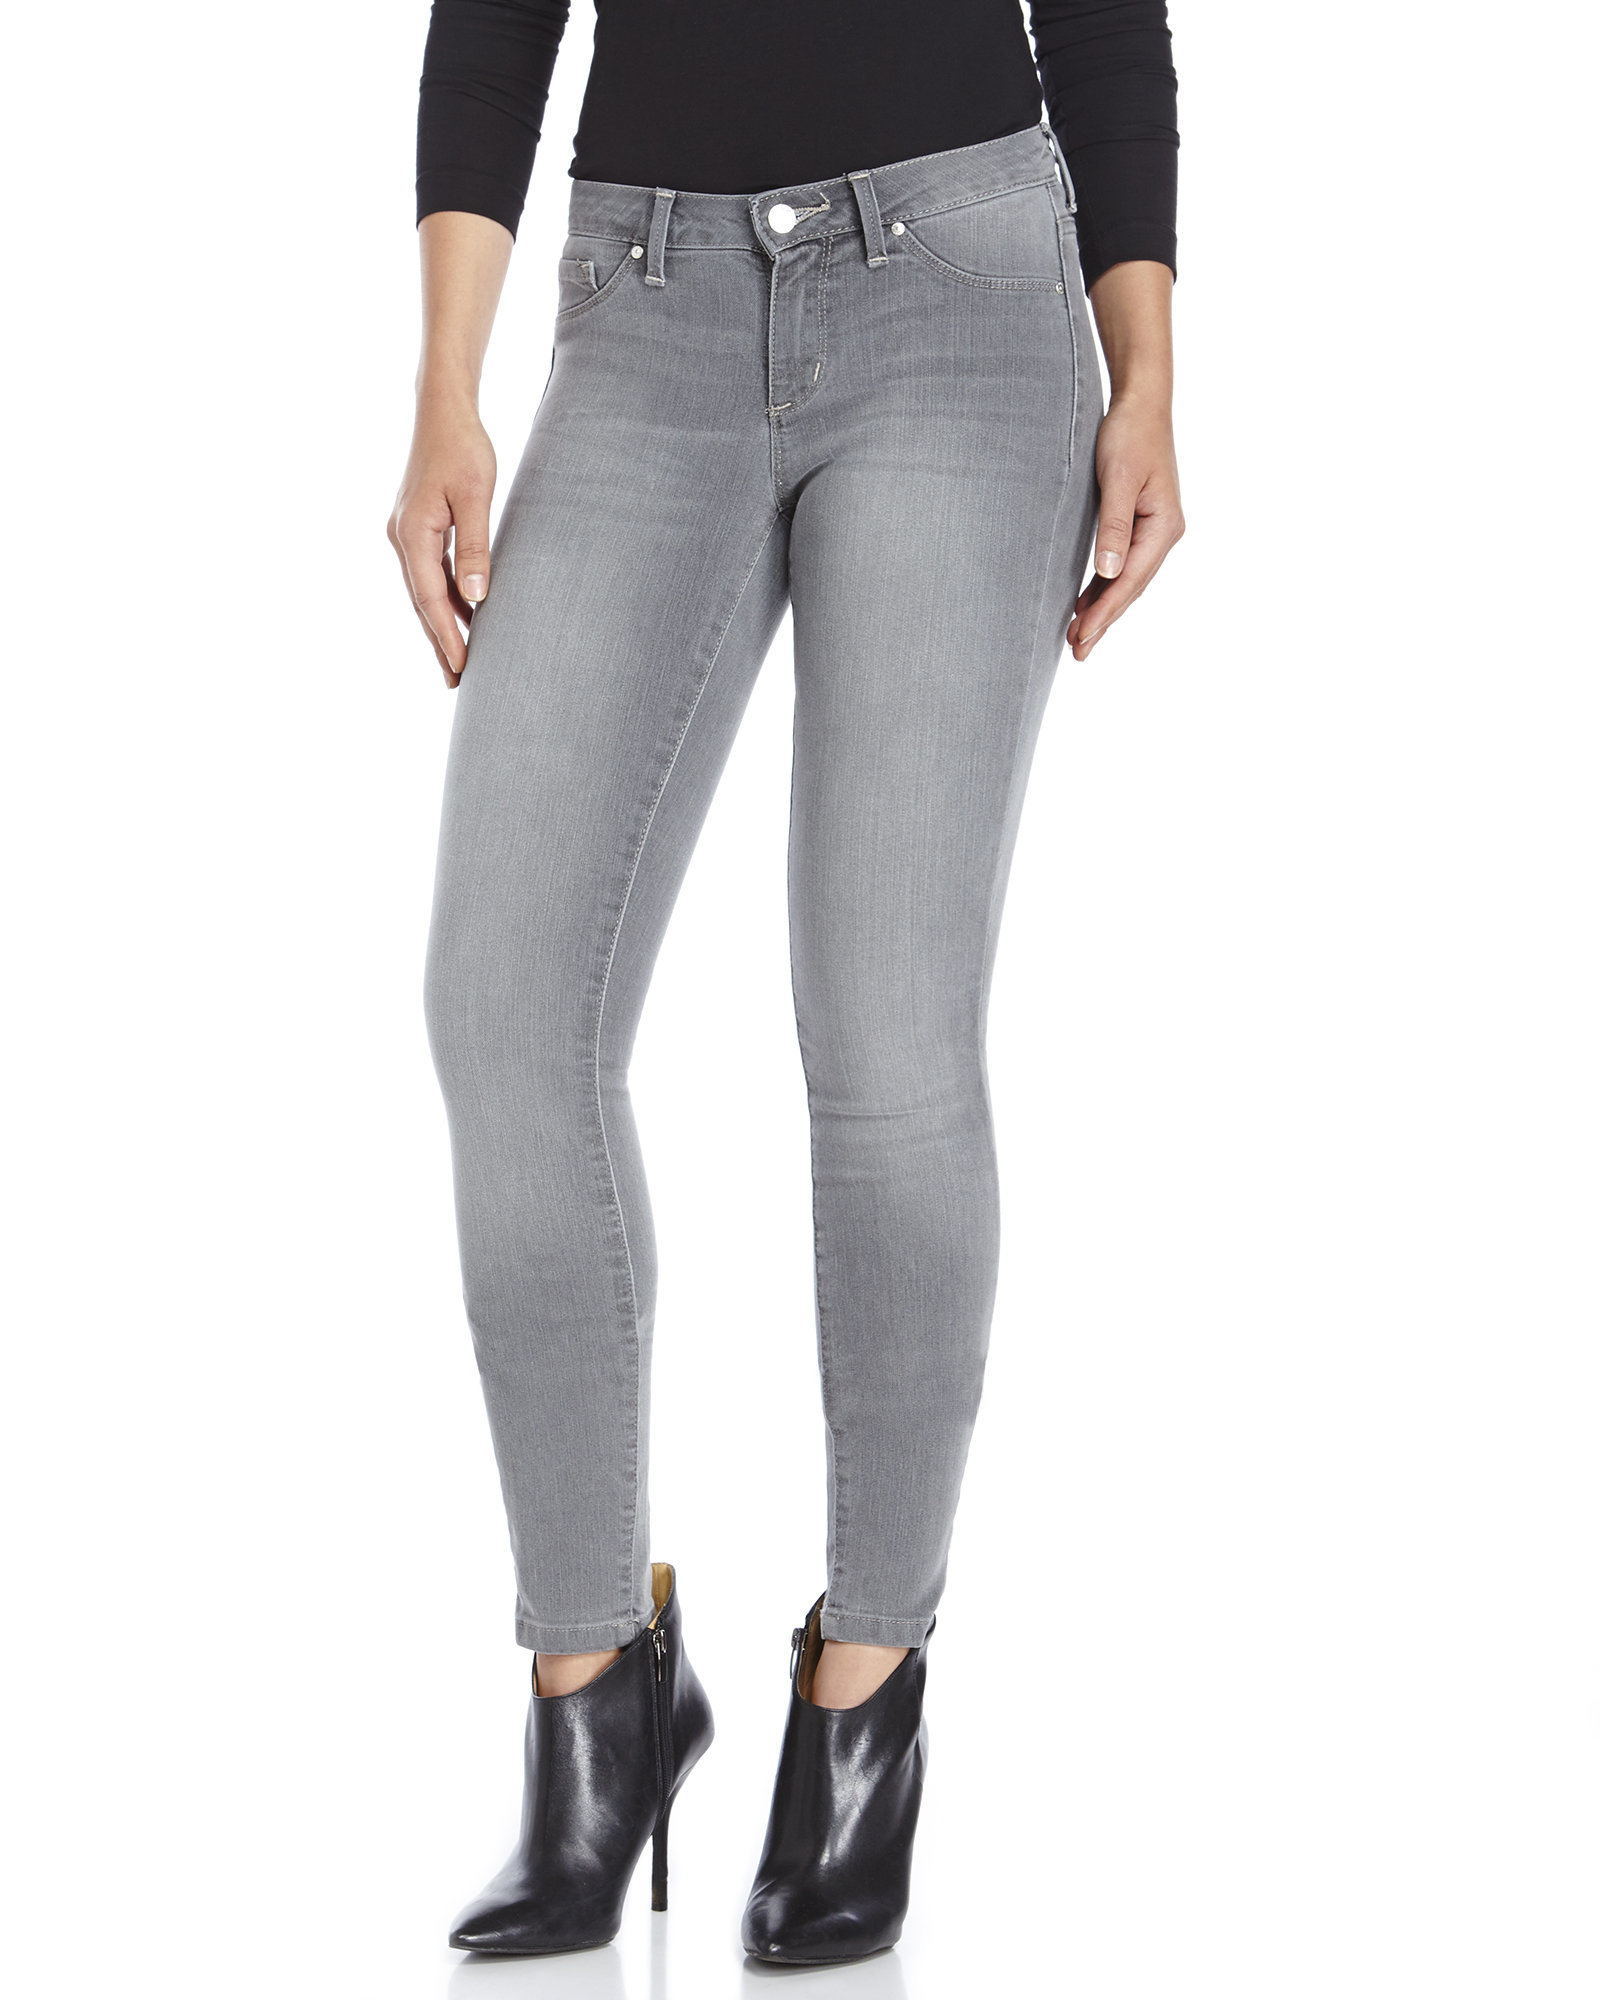 Lyst - Jessica Simpson Grey Kiss Me Super Skinny Jeans in Gray